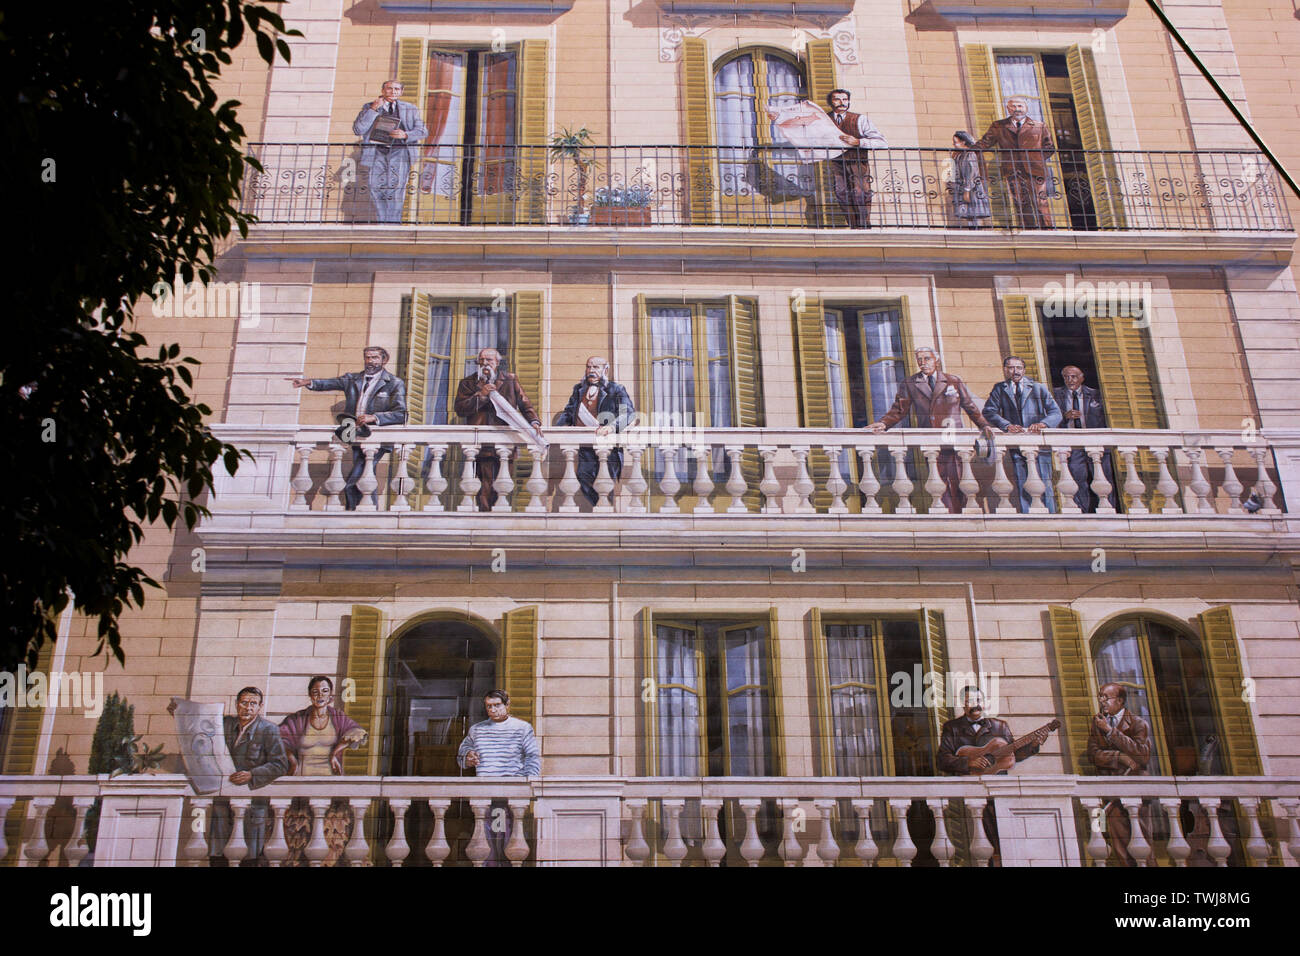 Barcelona trompe L'oeil mural depicting famous artists and other influencers in the history of Spain. Stock Photo